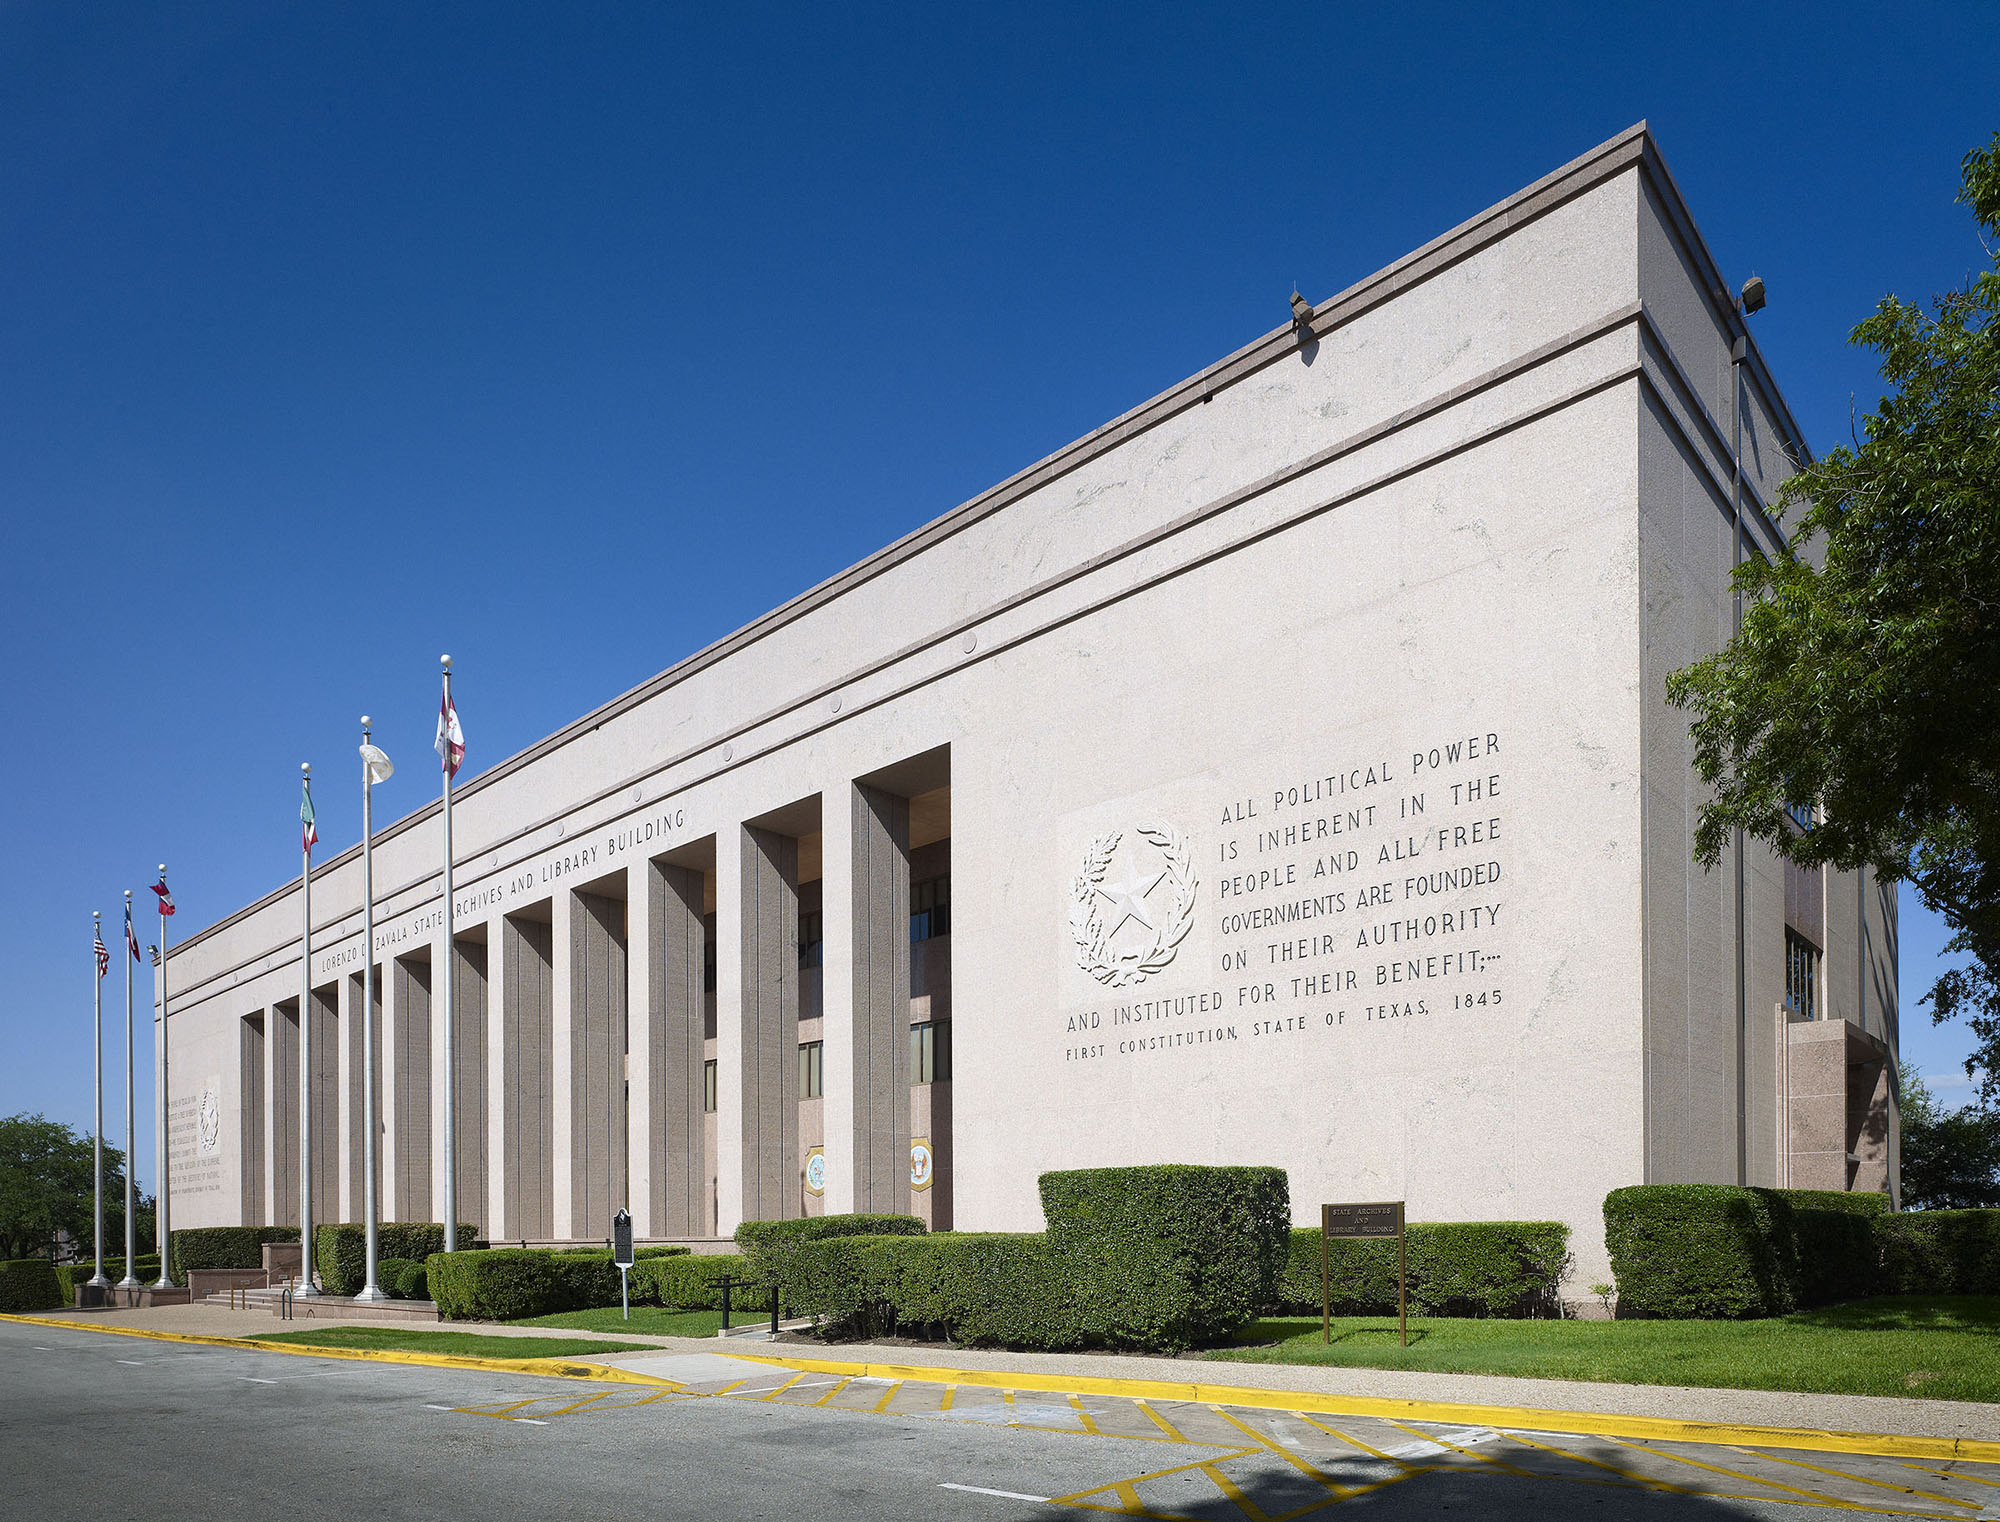 The photo shows the exterior of the Lorenzo de Zavala State Archives and Library Building.